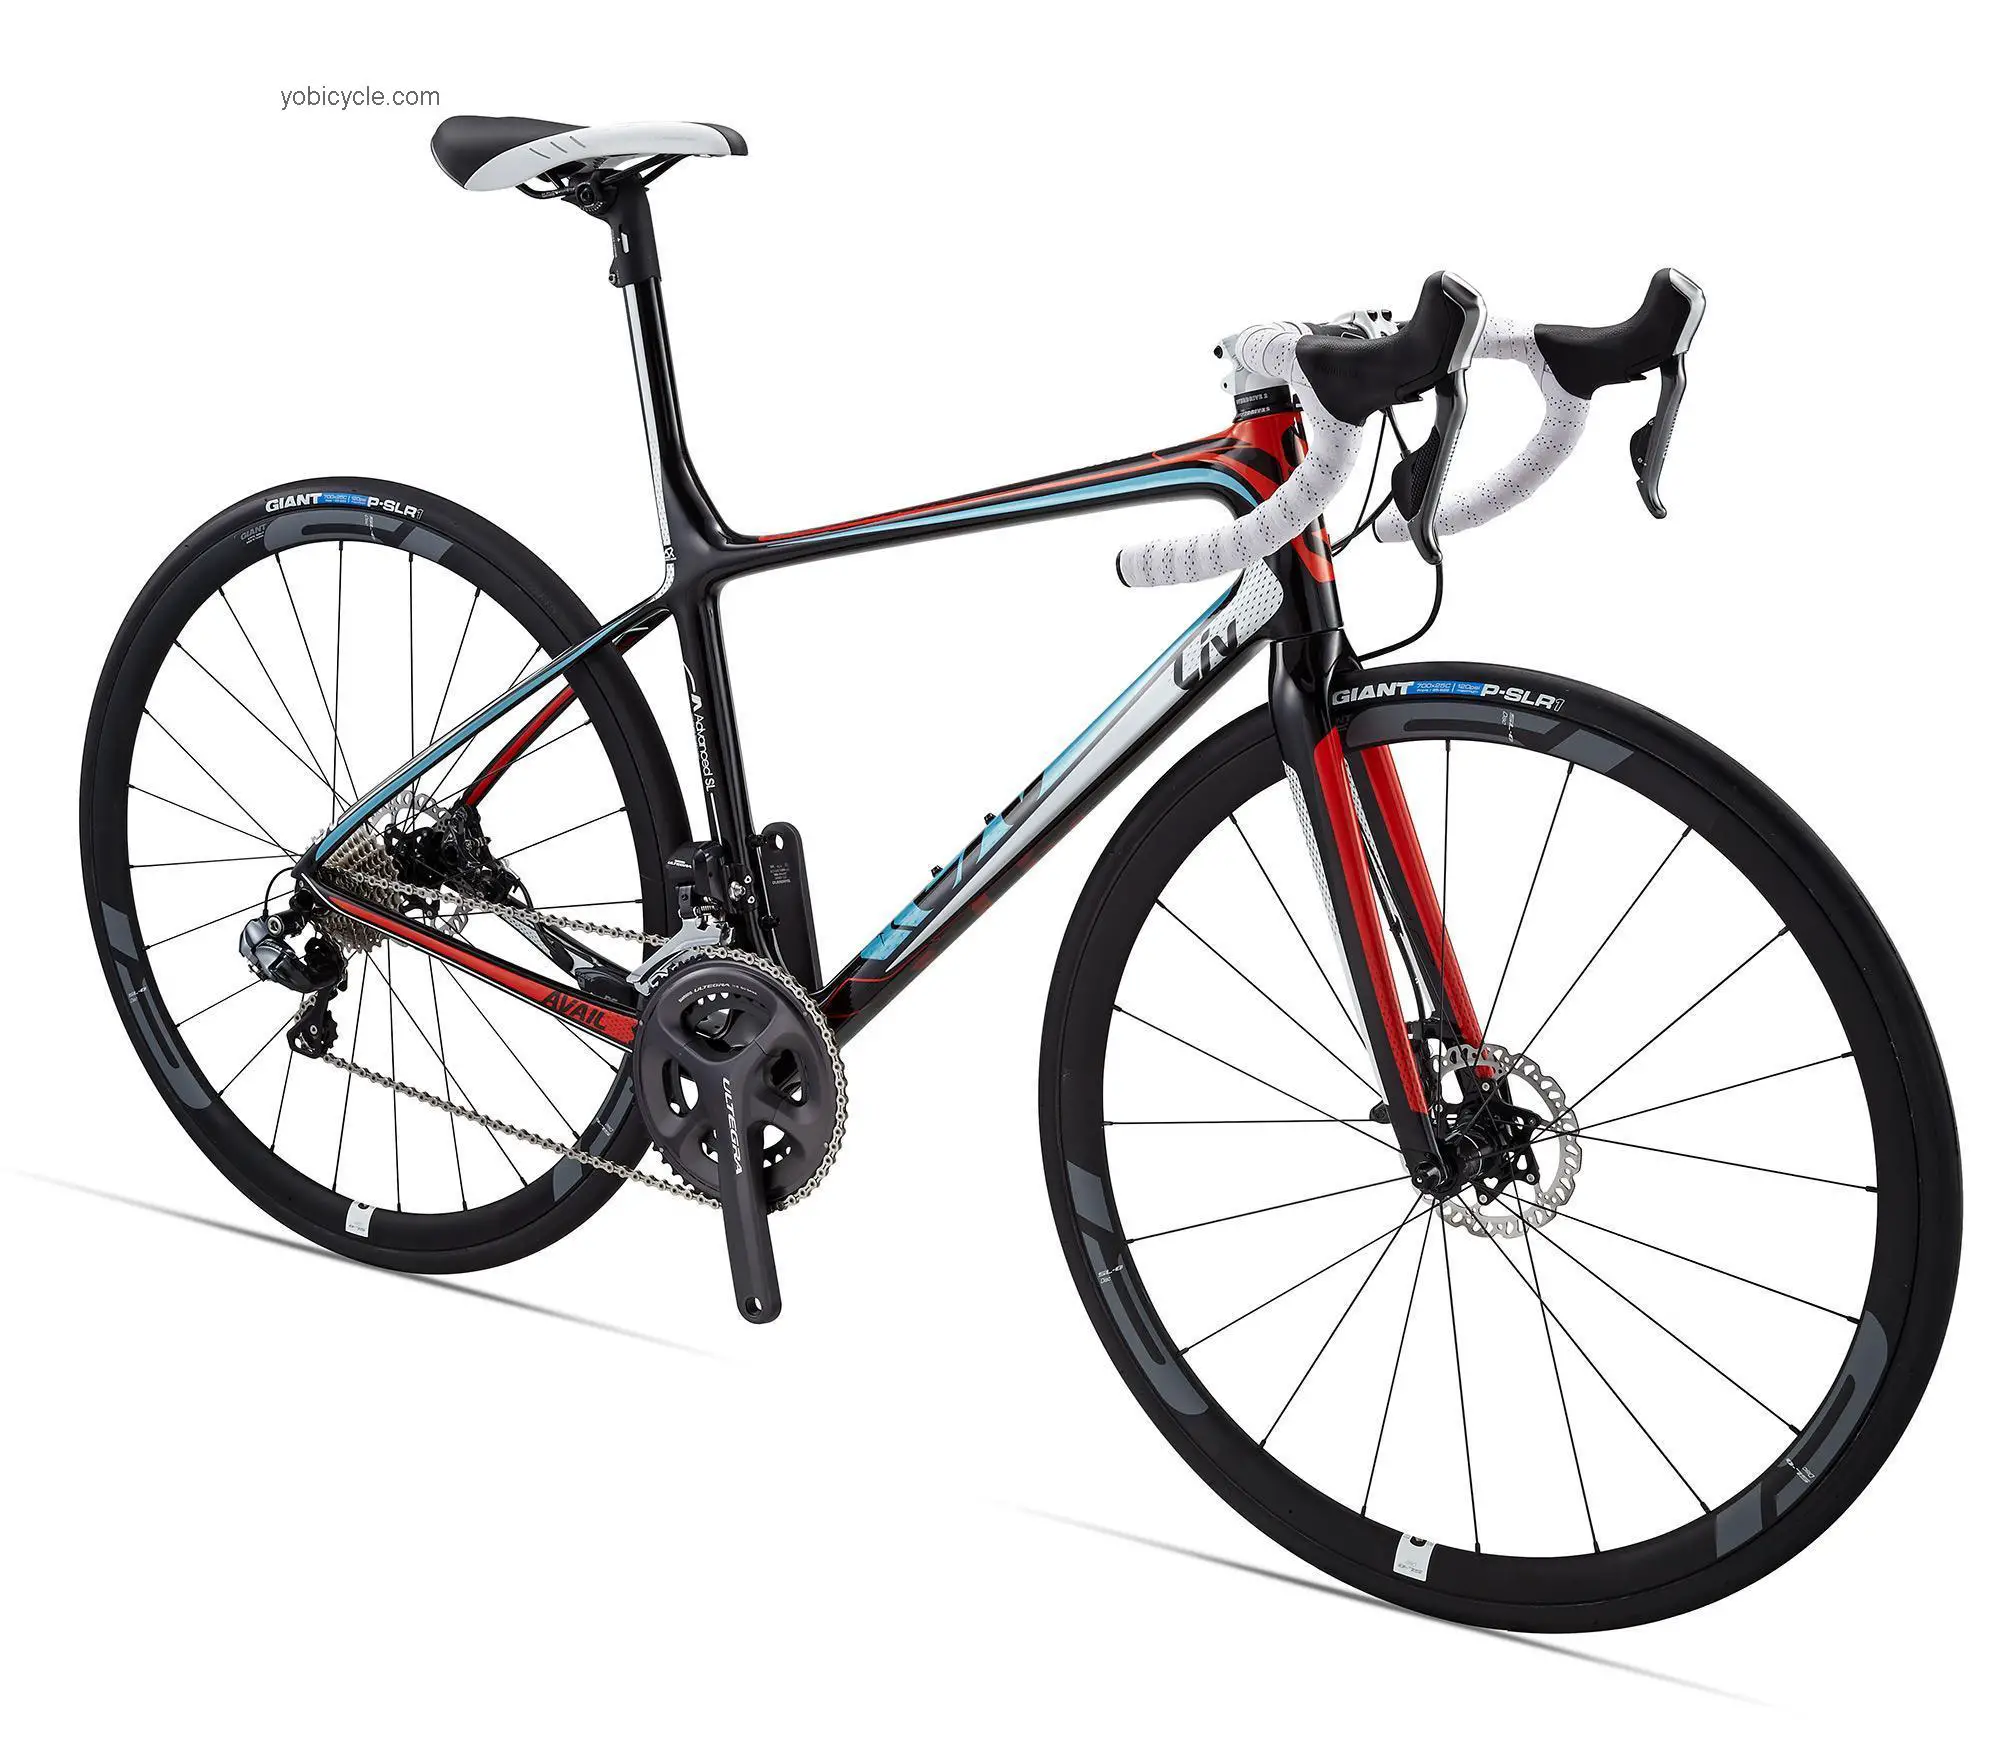 Giant Avail Advanced SL 1 2015 comparison online with competitors